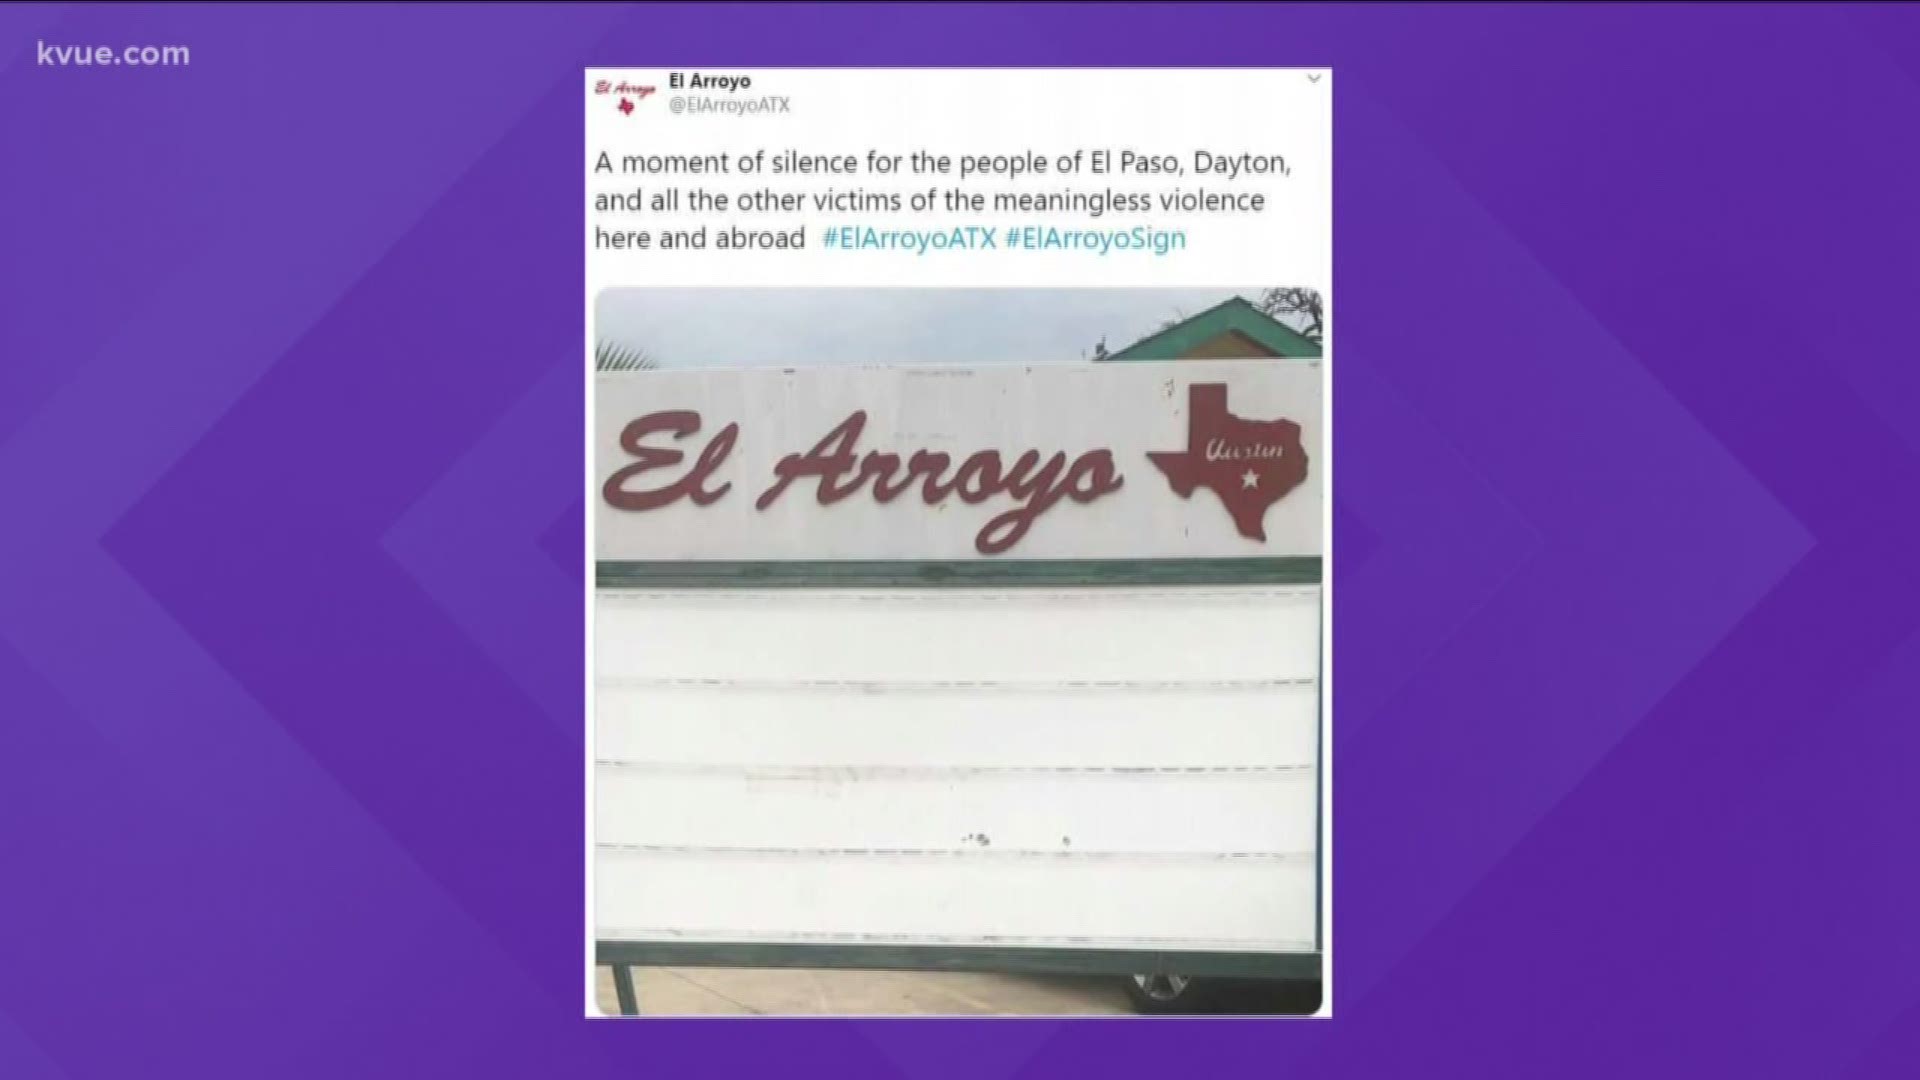 Known for its witty marquee sign out front, Austin's El Arroyo was noticeably blank after two recent mass shootings.